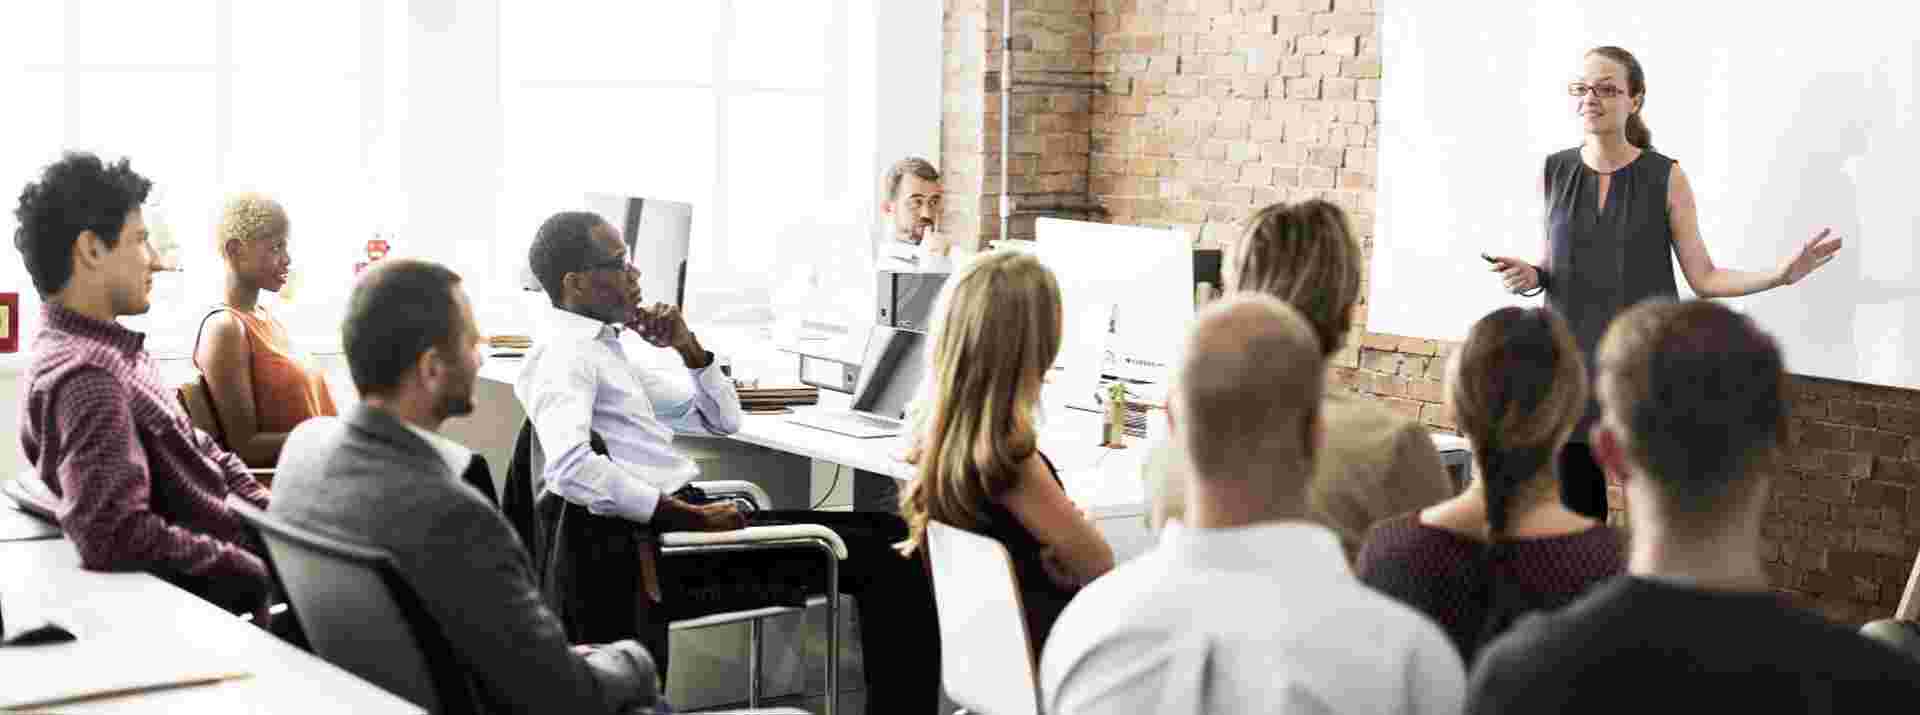 Staff Training and Development - What HR Departments Need to Know